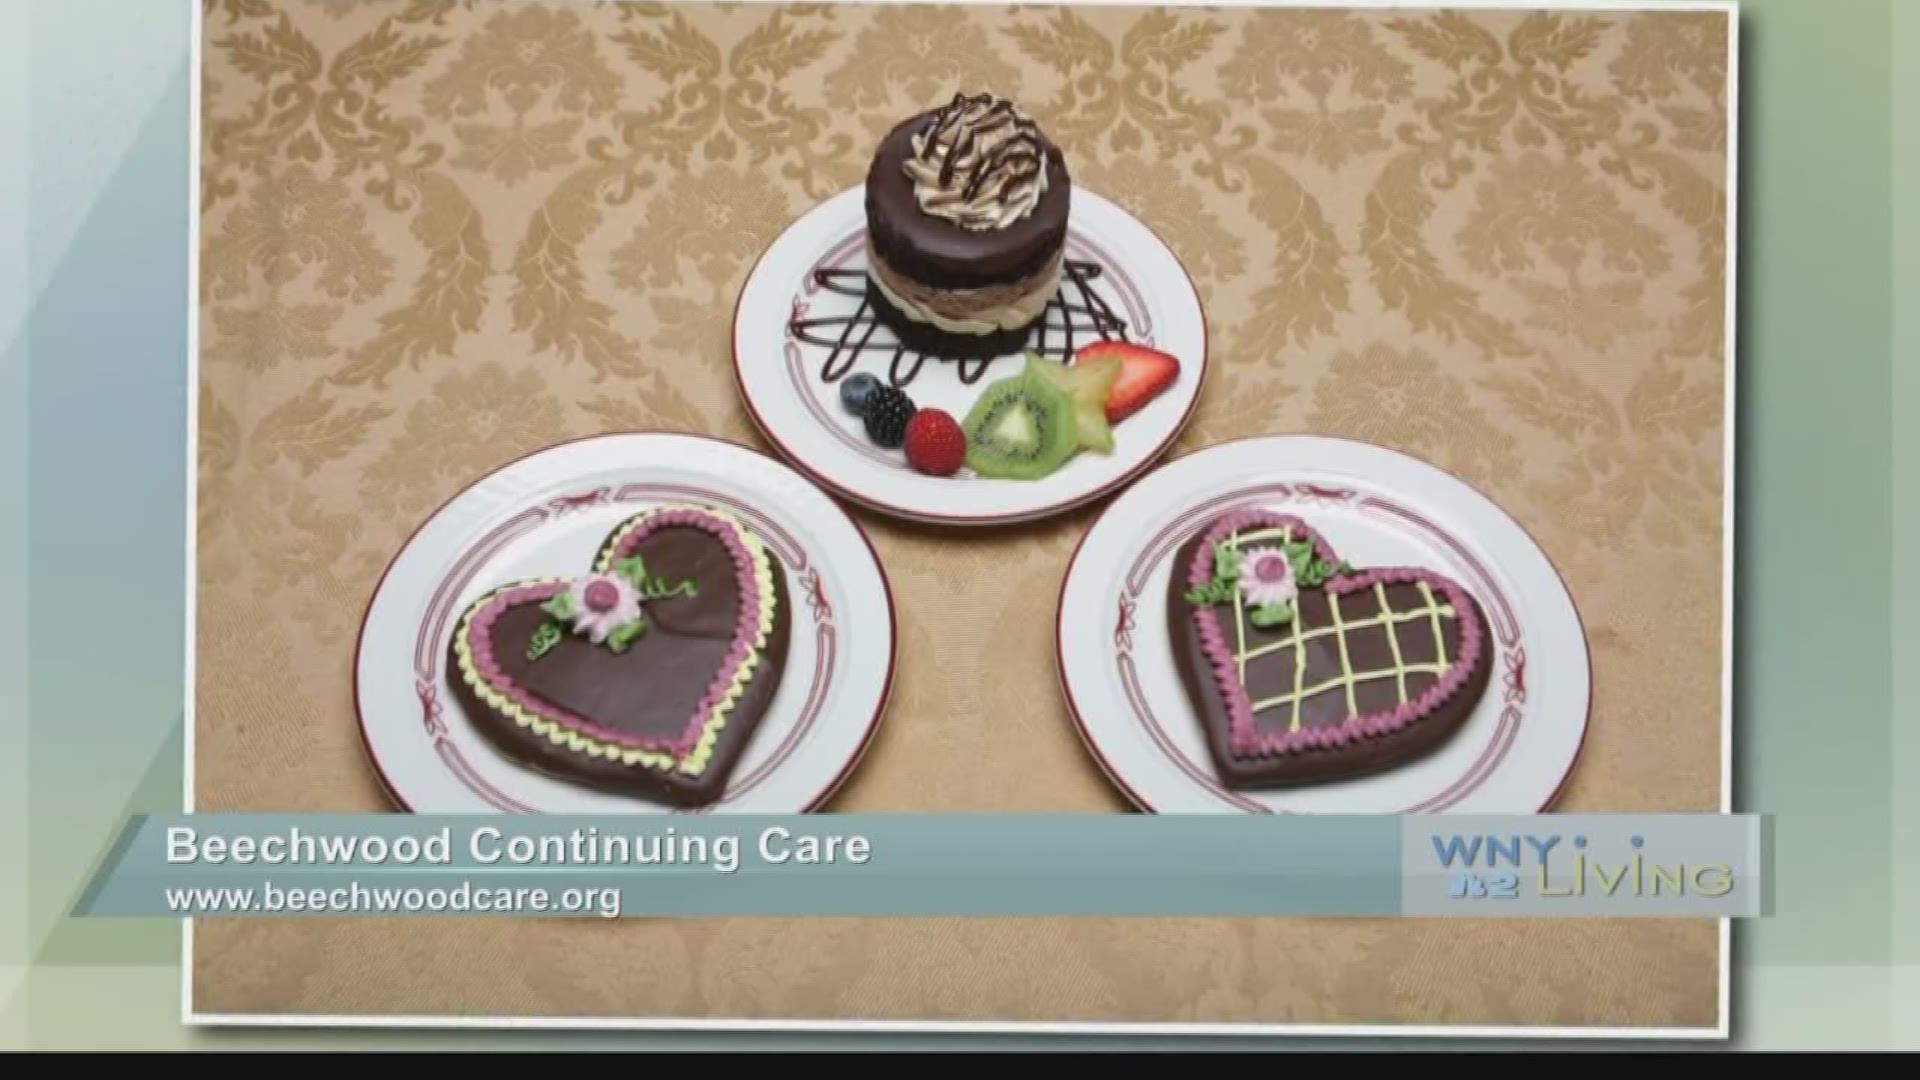 WNY Living - October 7 - Beechwood Continuing Care